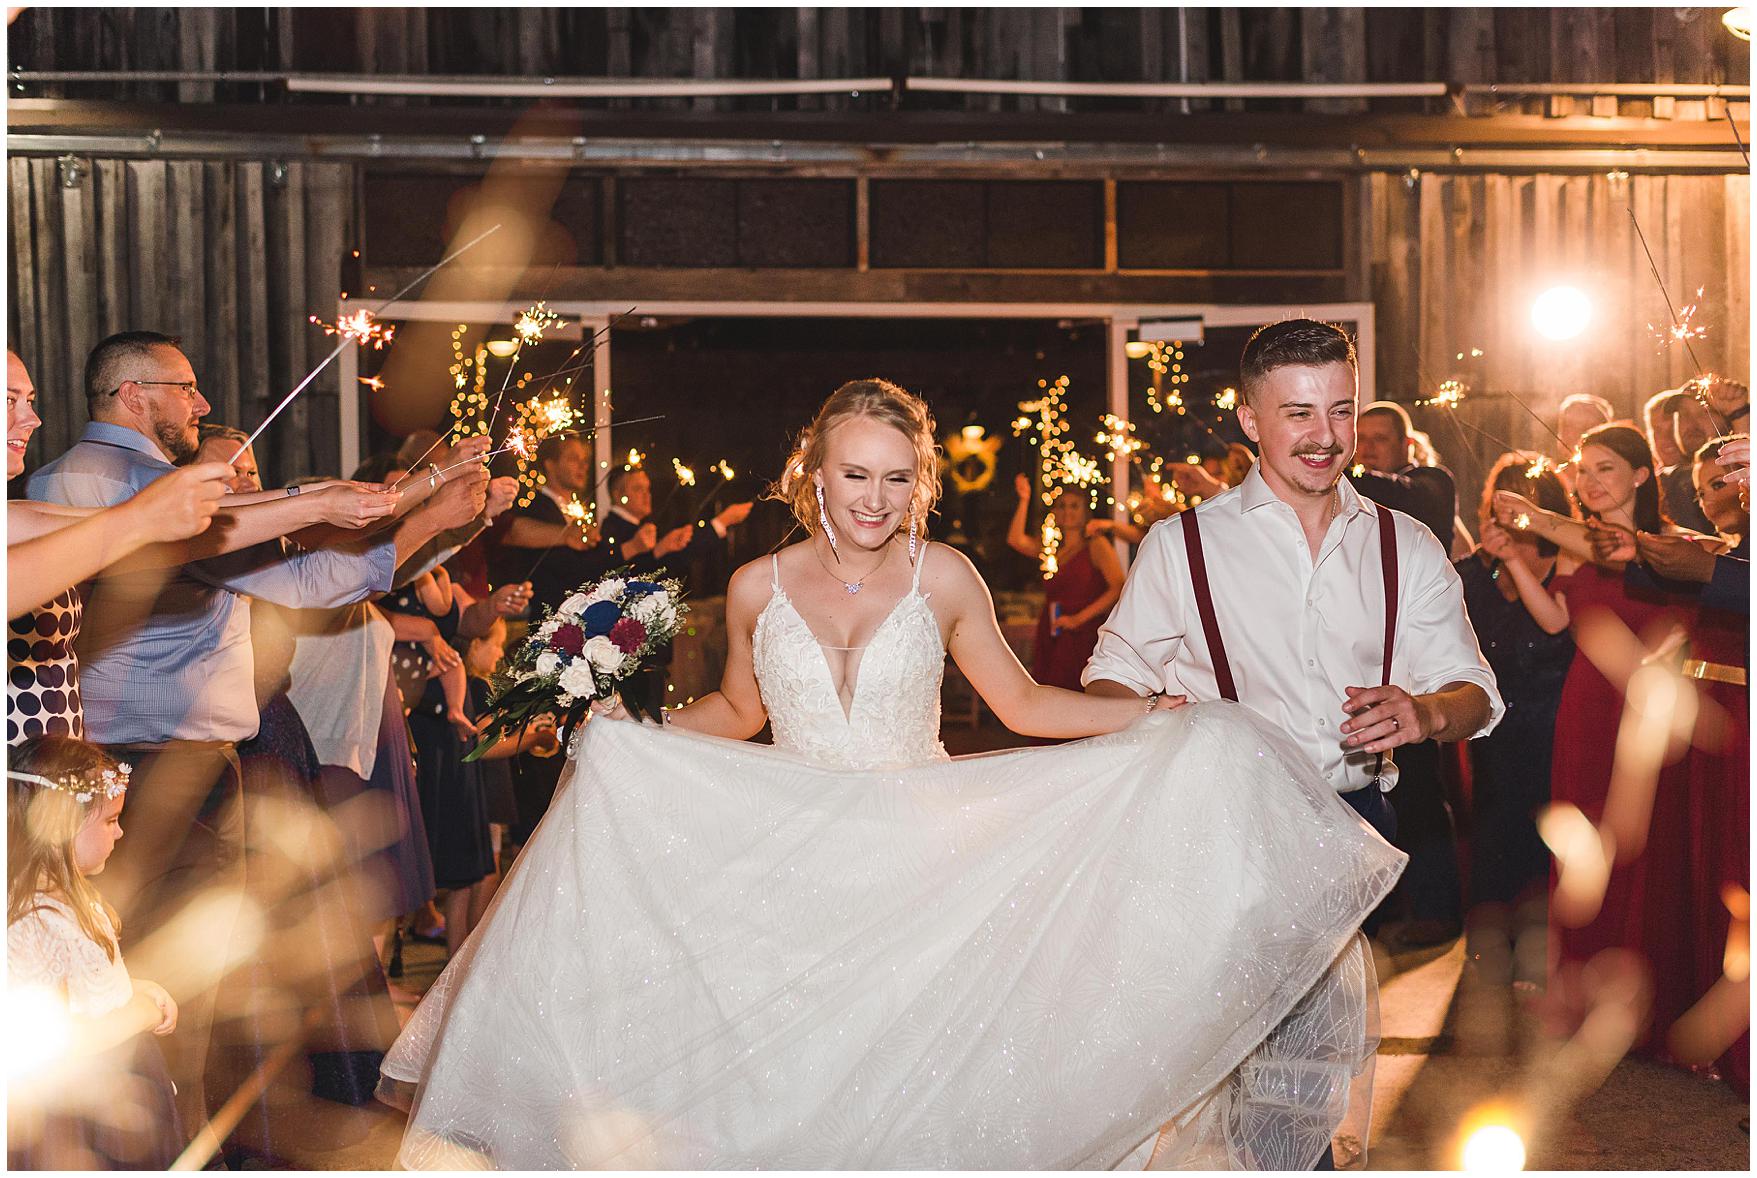 sparkler photos and exit at a southern wedding